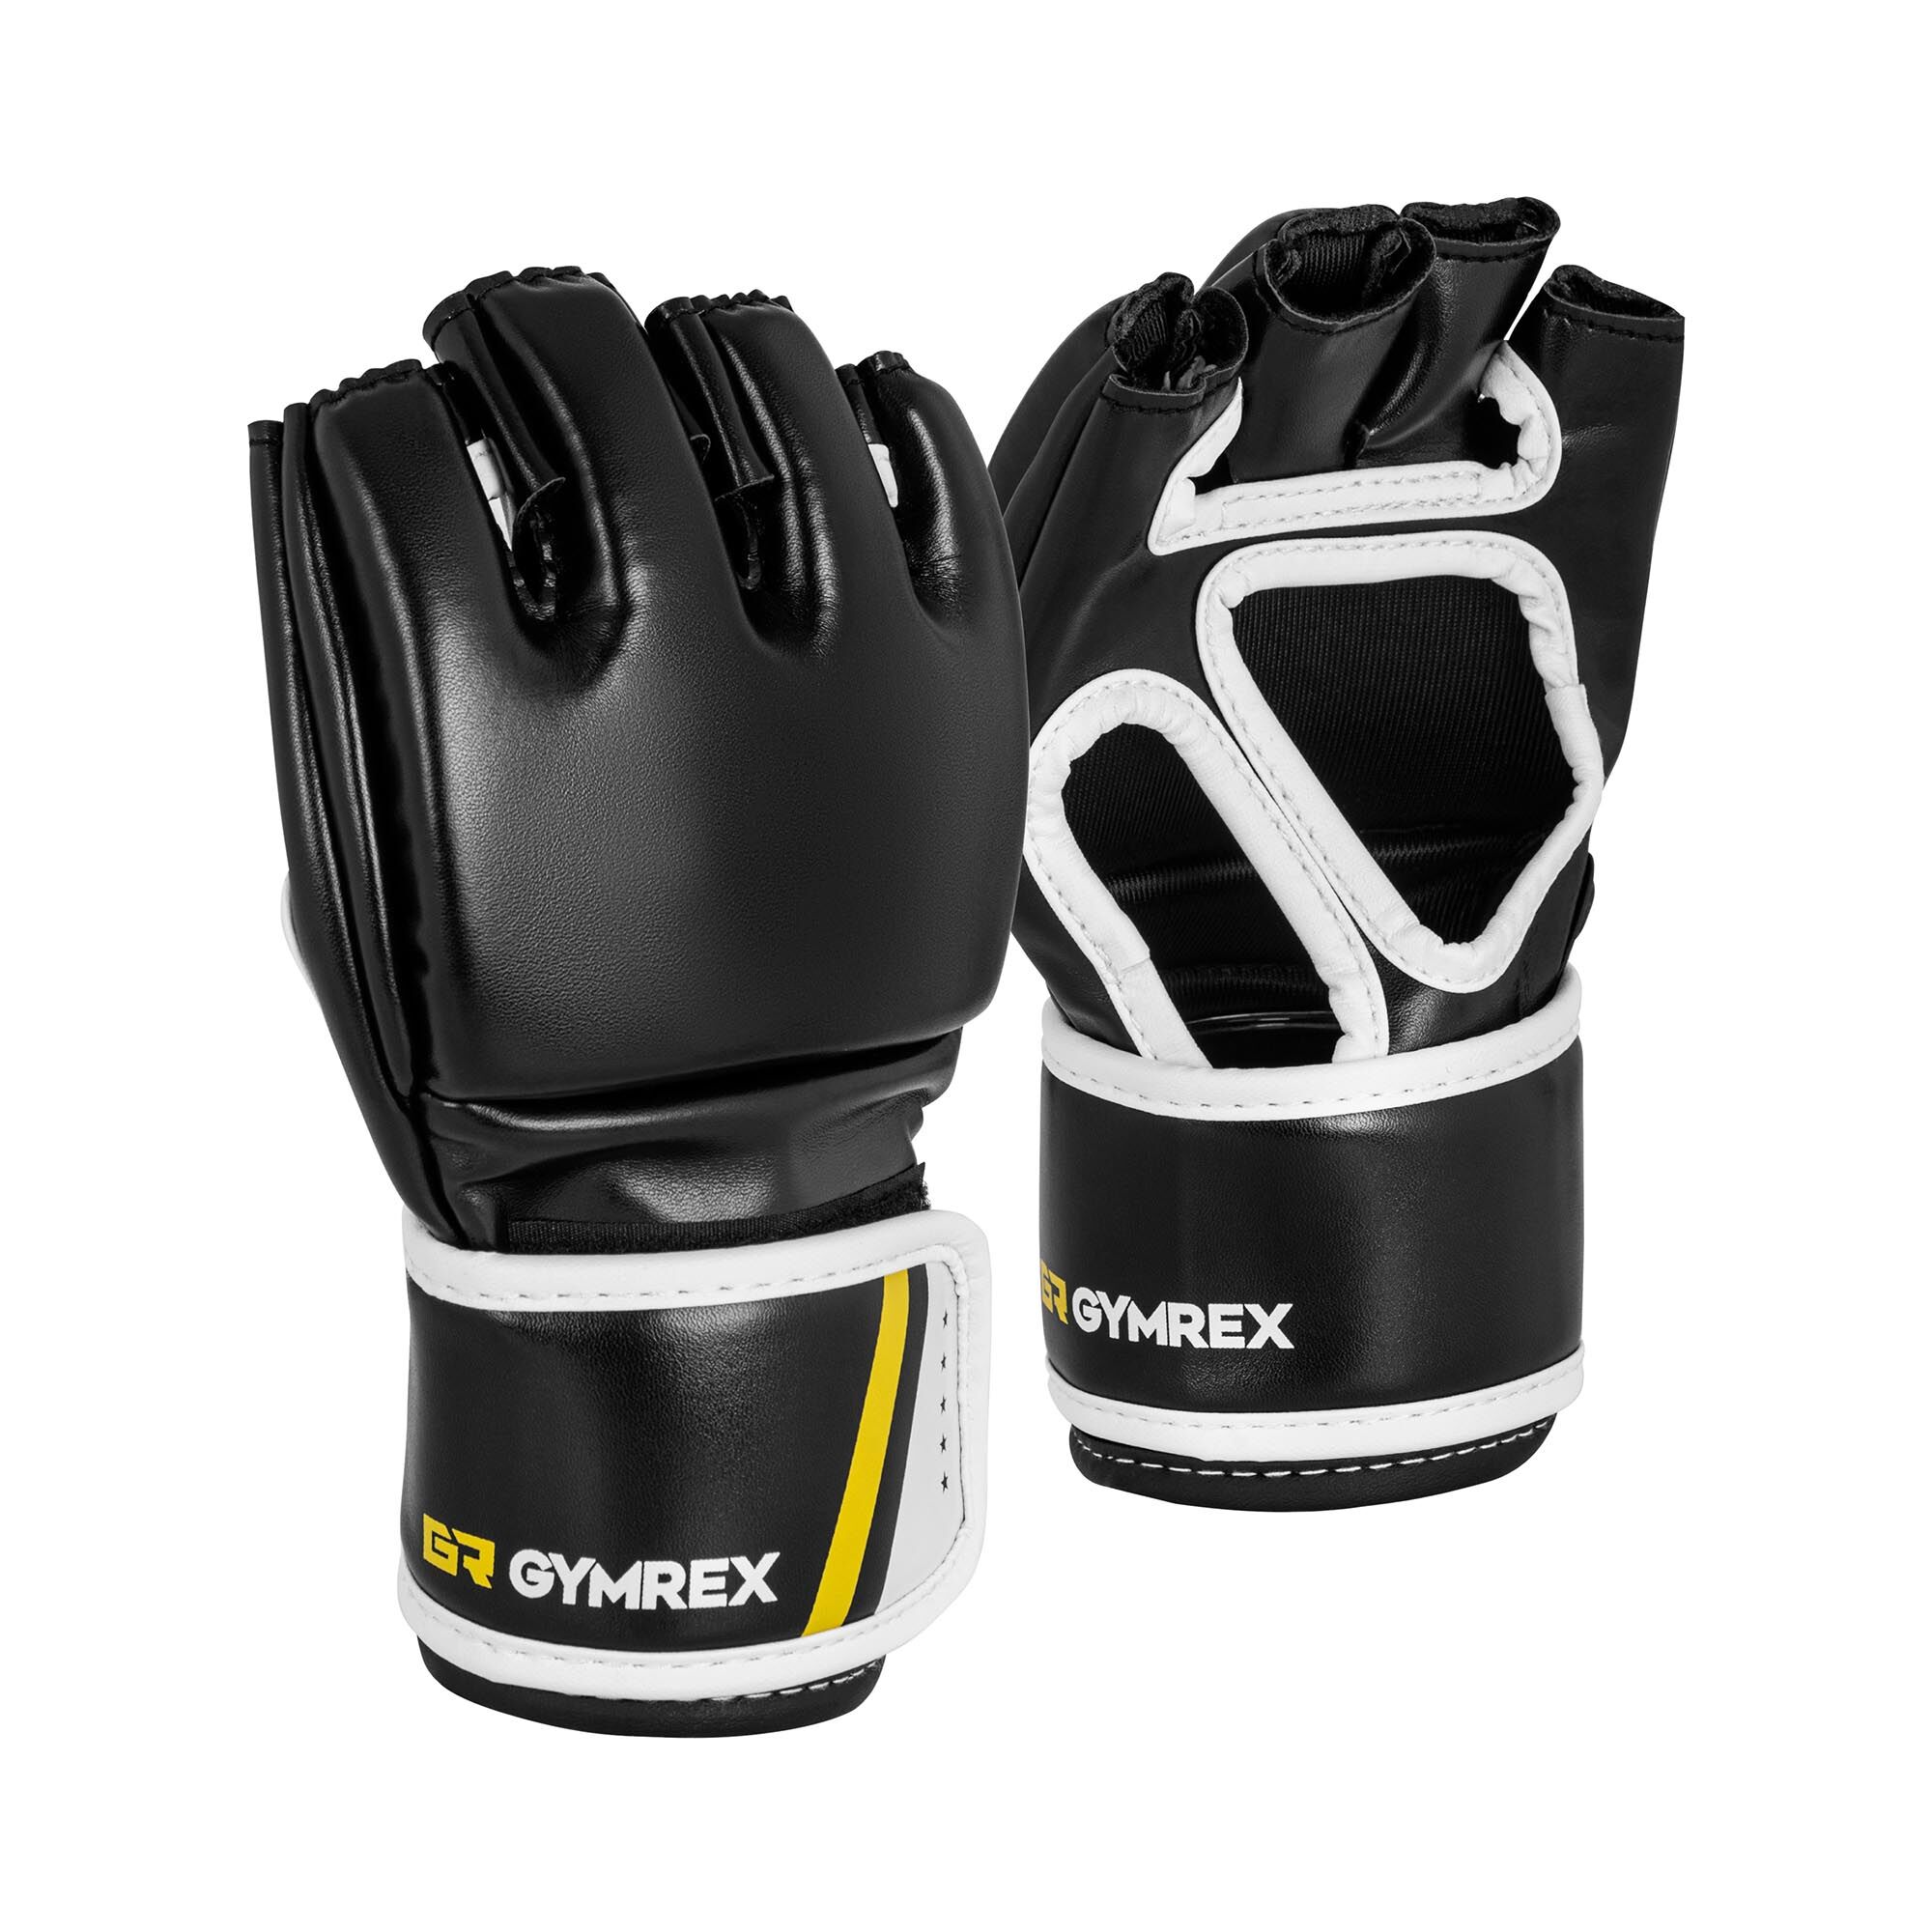 Gymrex MMA Gloves - size S/M - black - without thumbs